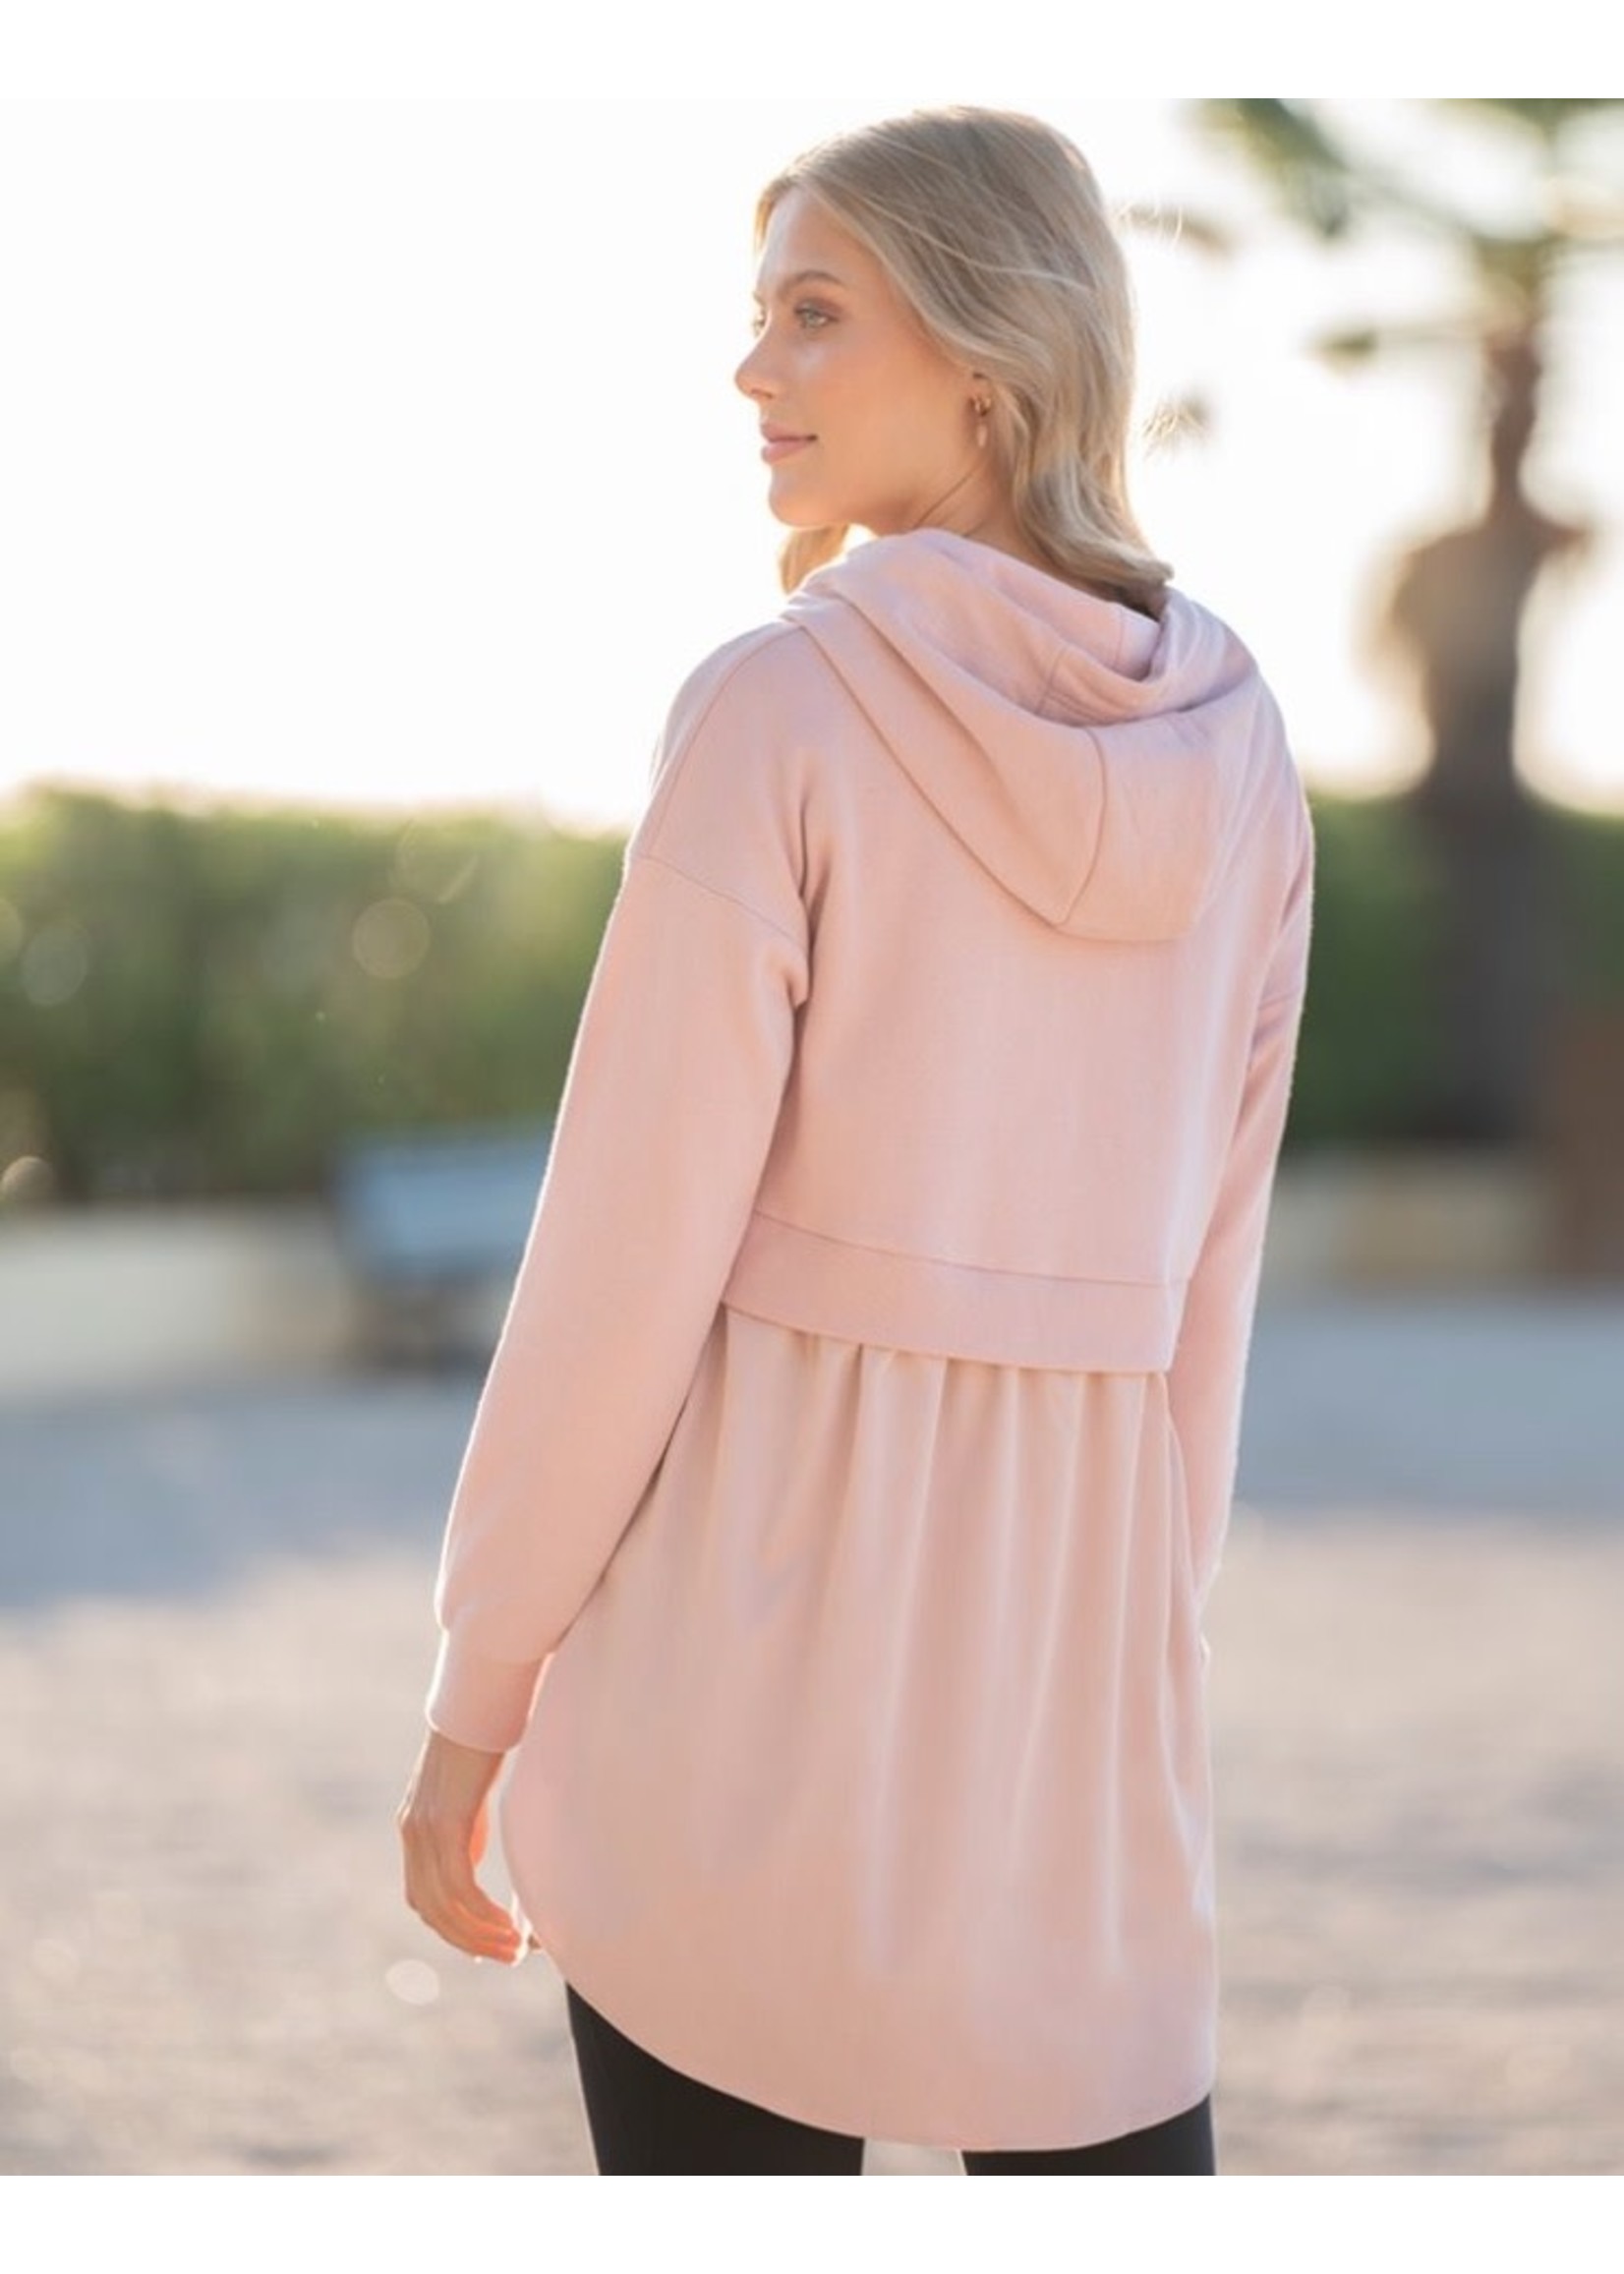 Seraphine Seraphine, Pink Hoodie Maternity to Nursing Top with Built in Undershirt